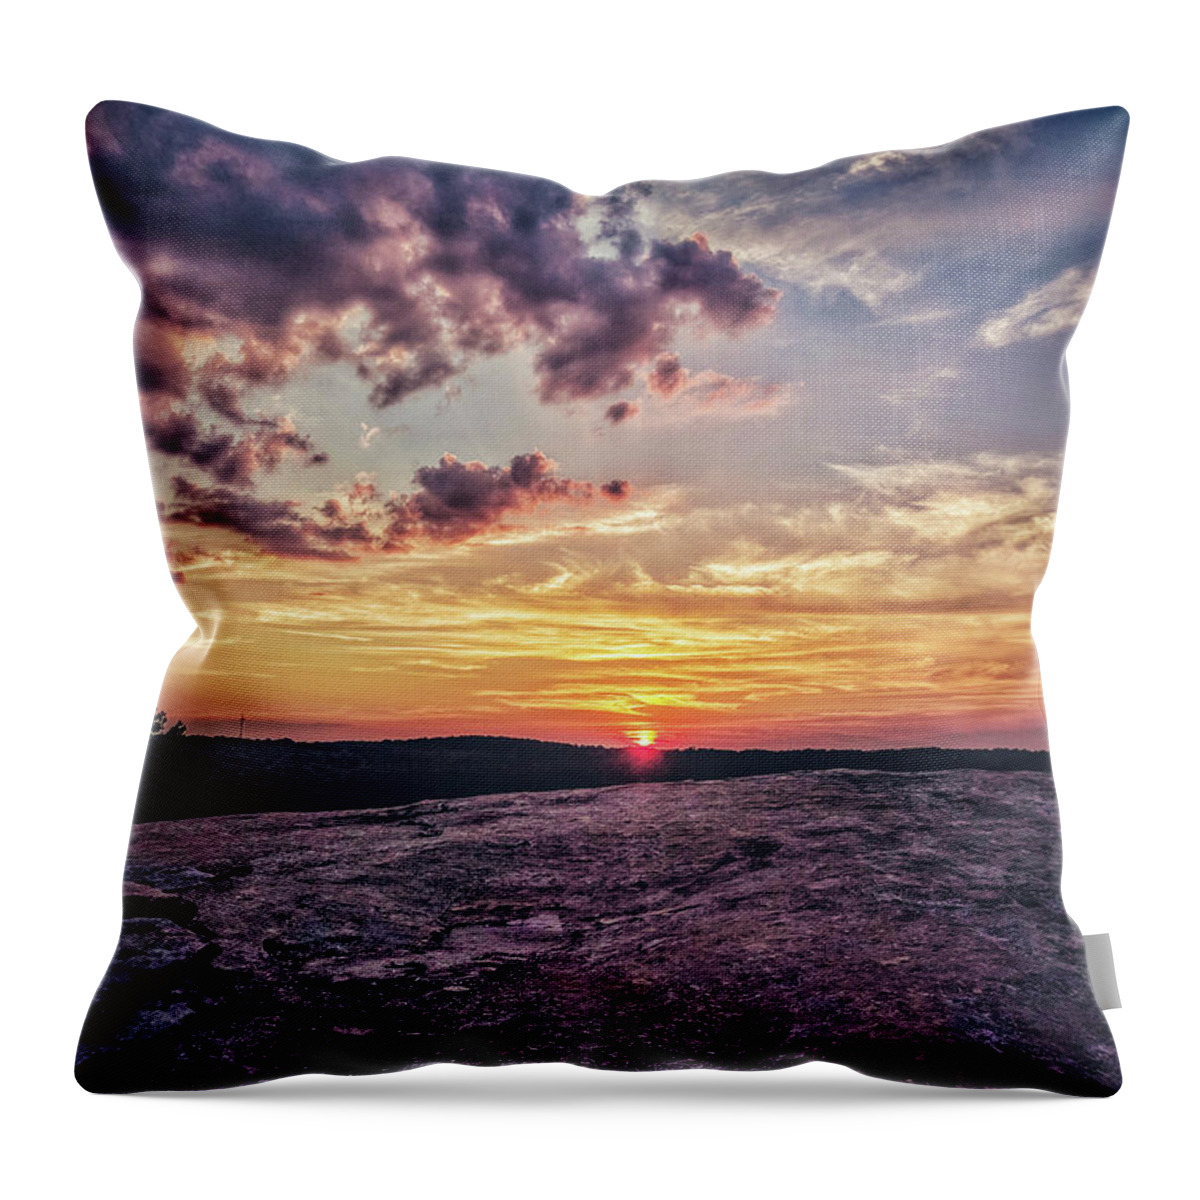 Mountain Throw Pillow featuring the photograph Mountain Sunset by Mike Dunn